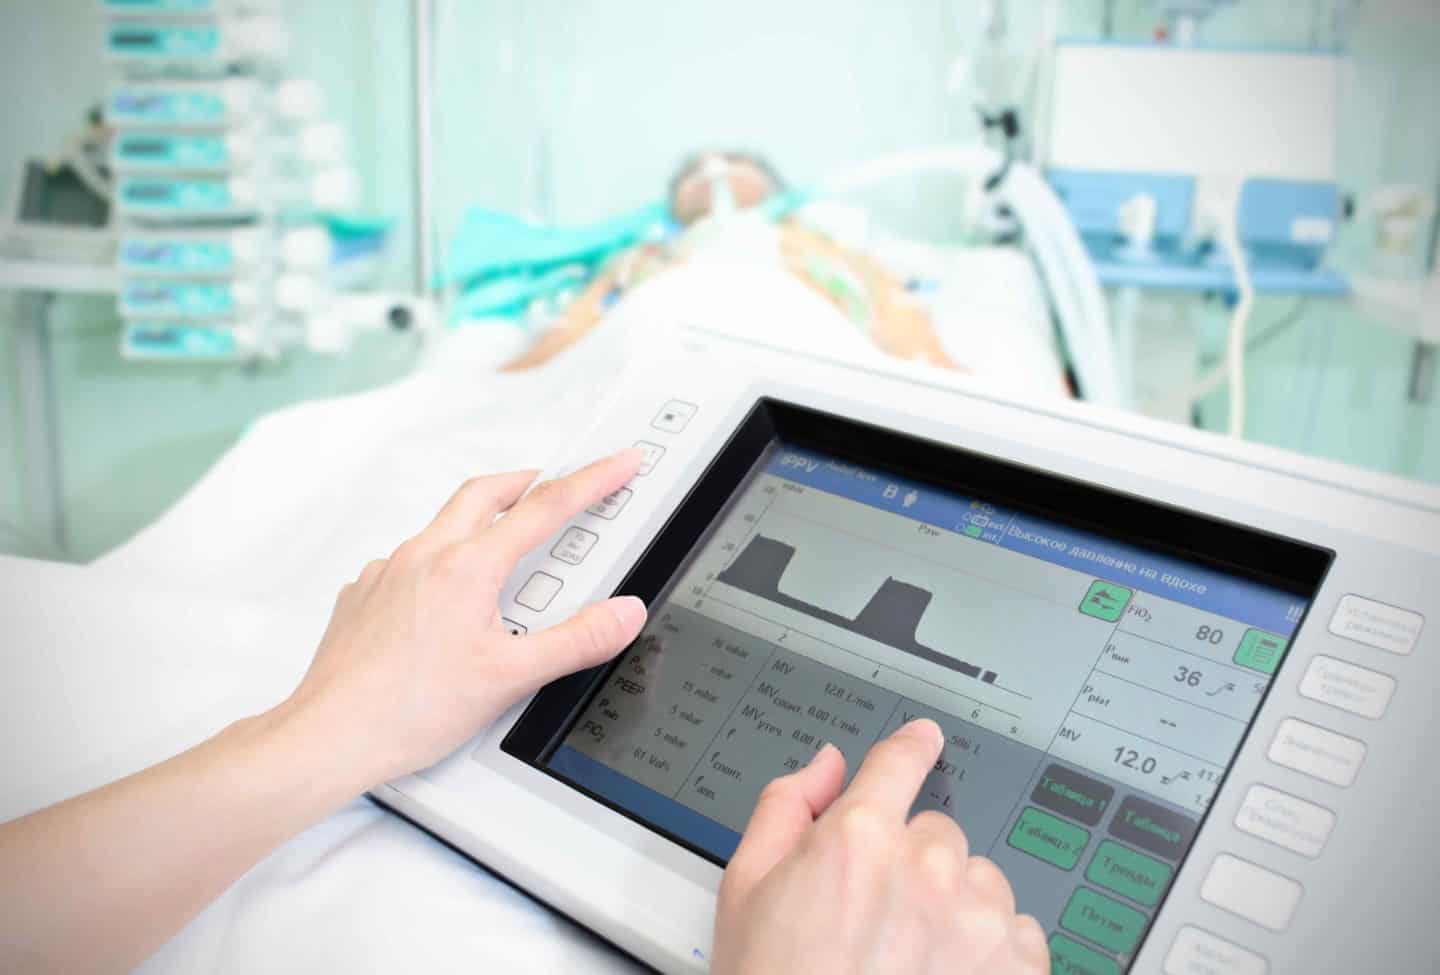 A hospital worker's hands using a monitoring device in front of an ICU patient on a ventilator